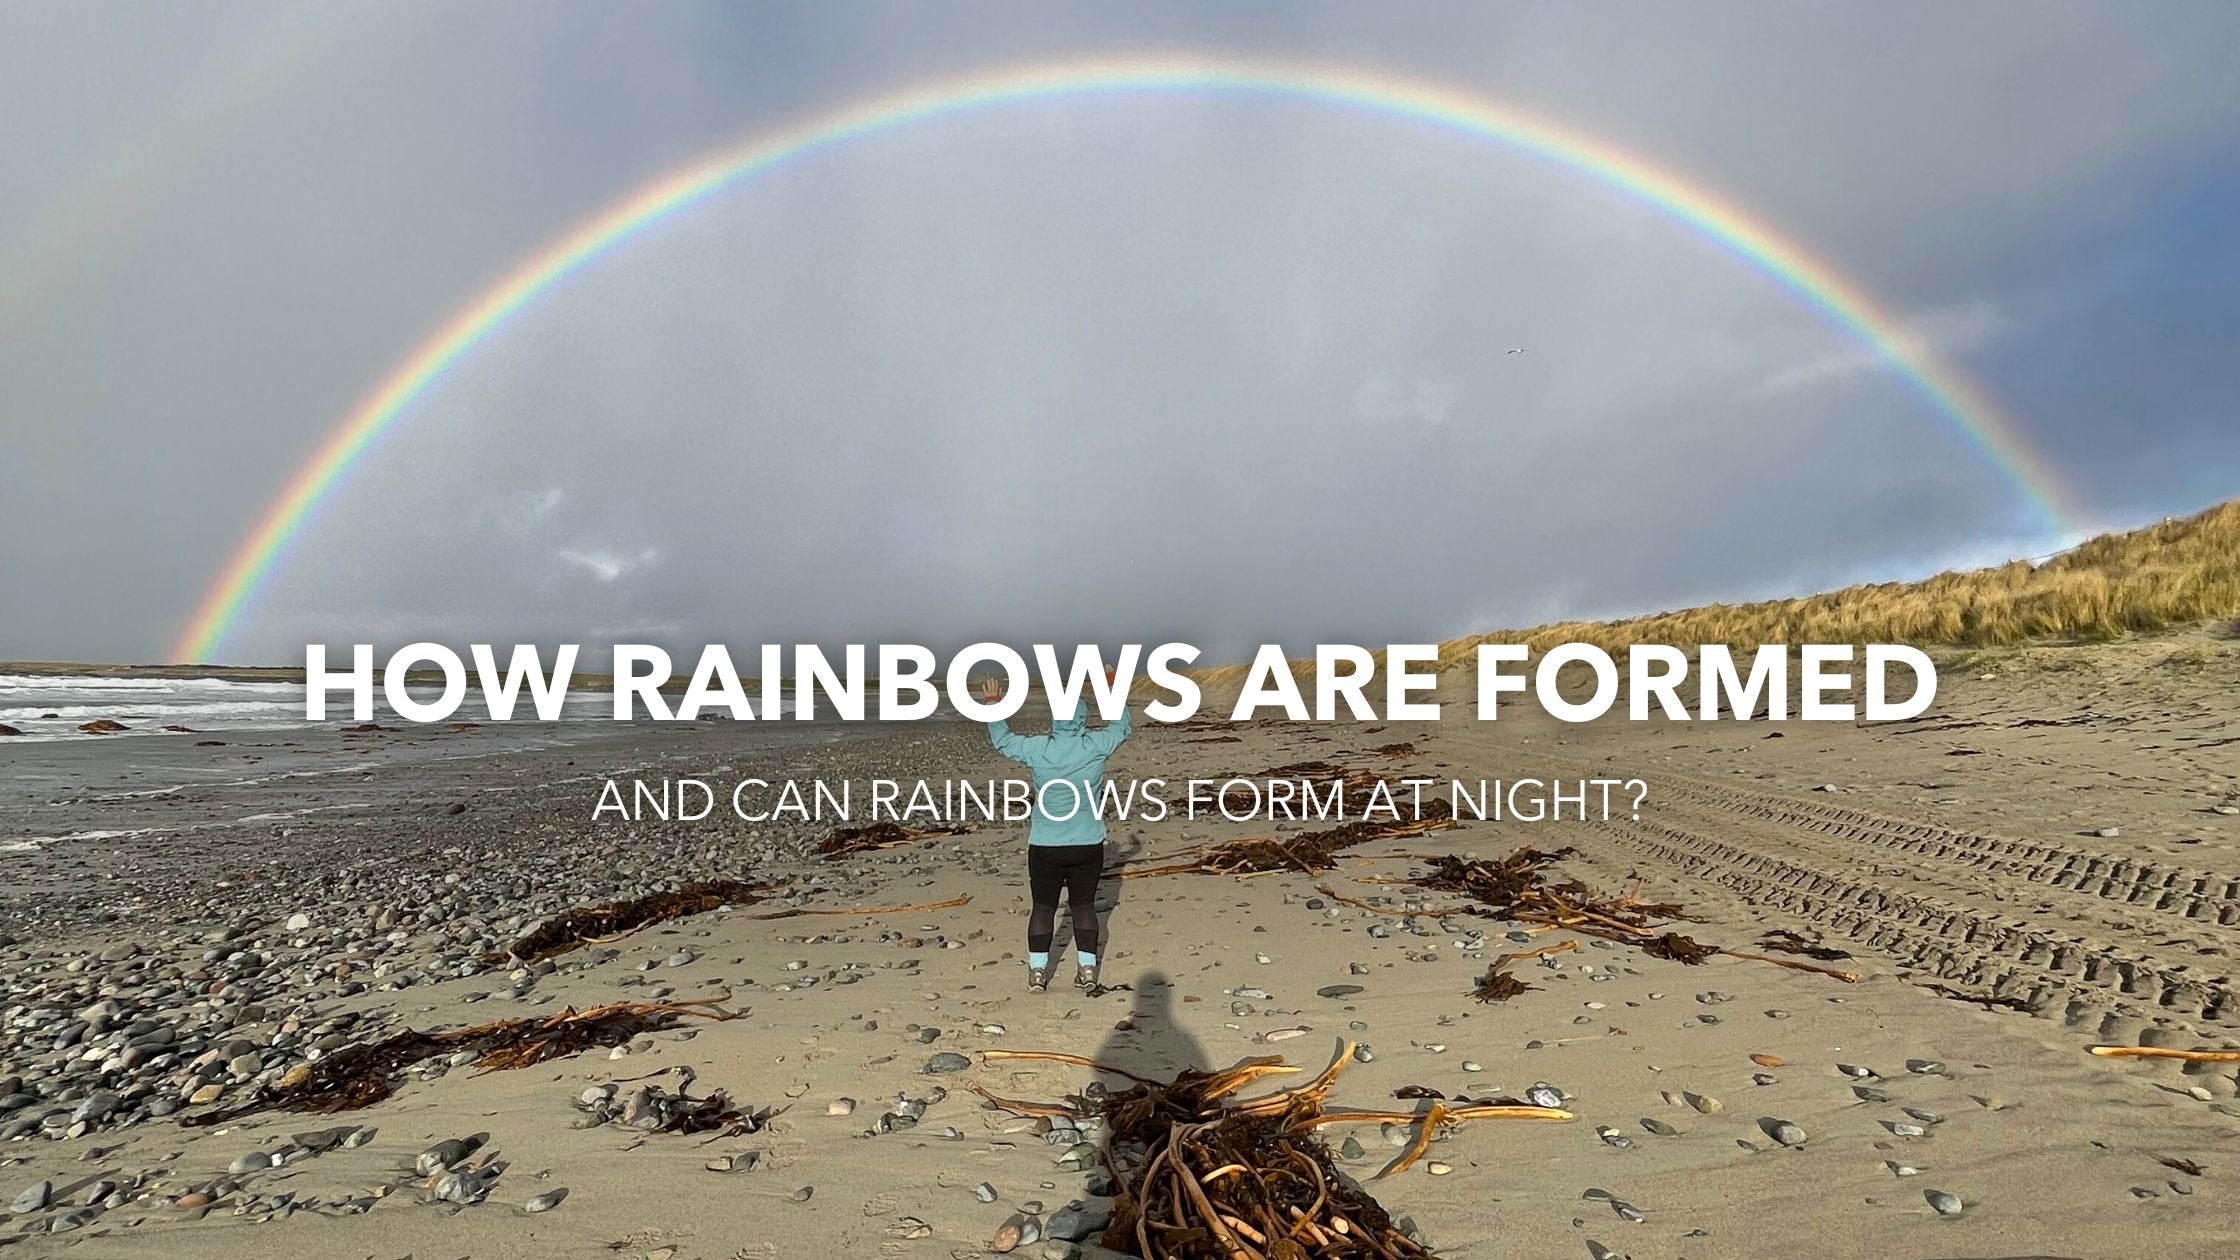 How Are Rainbows Formed?